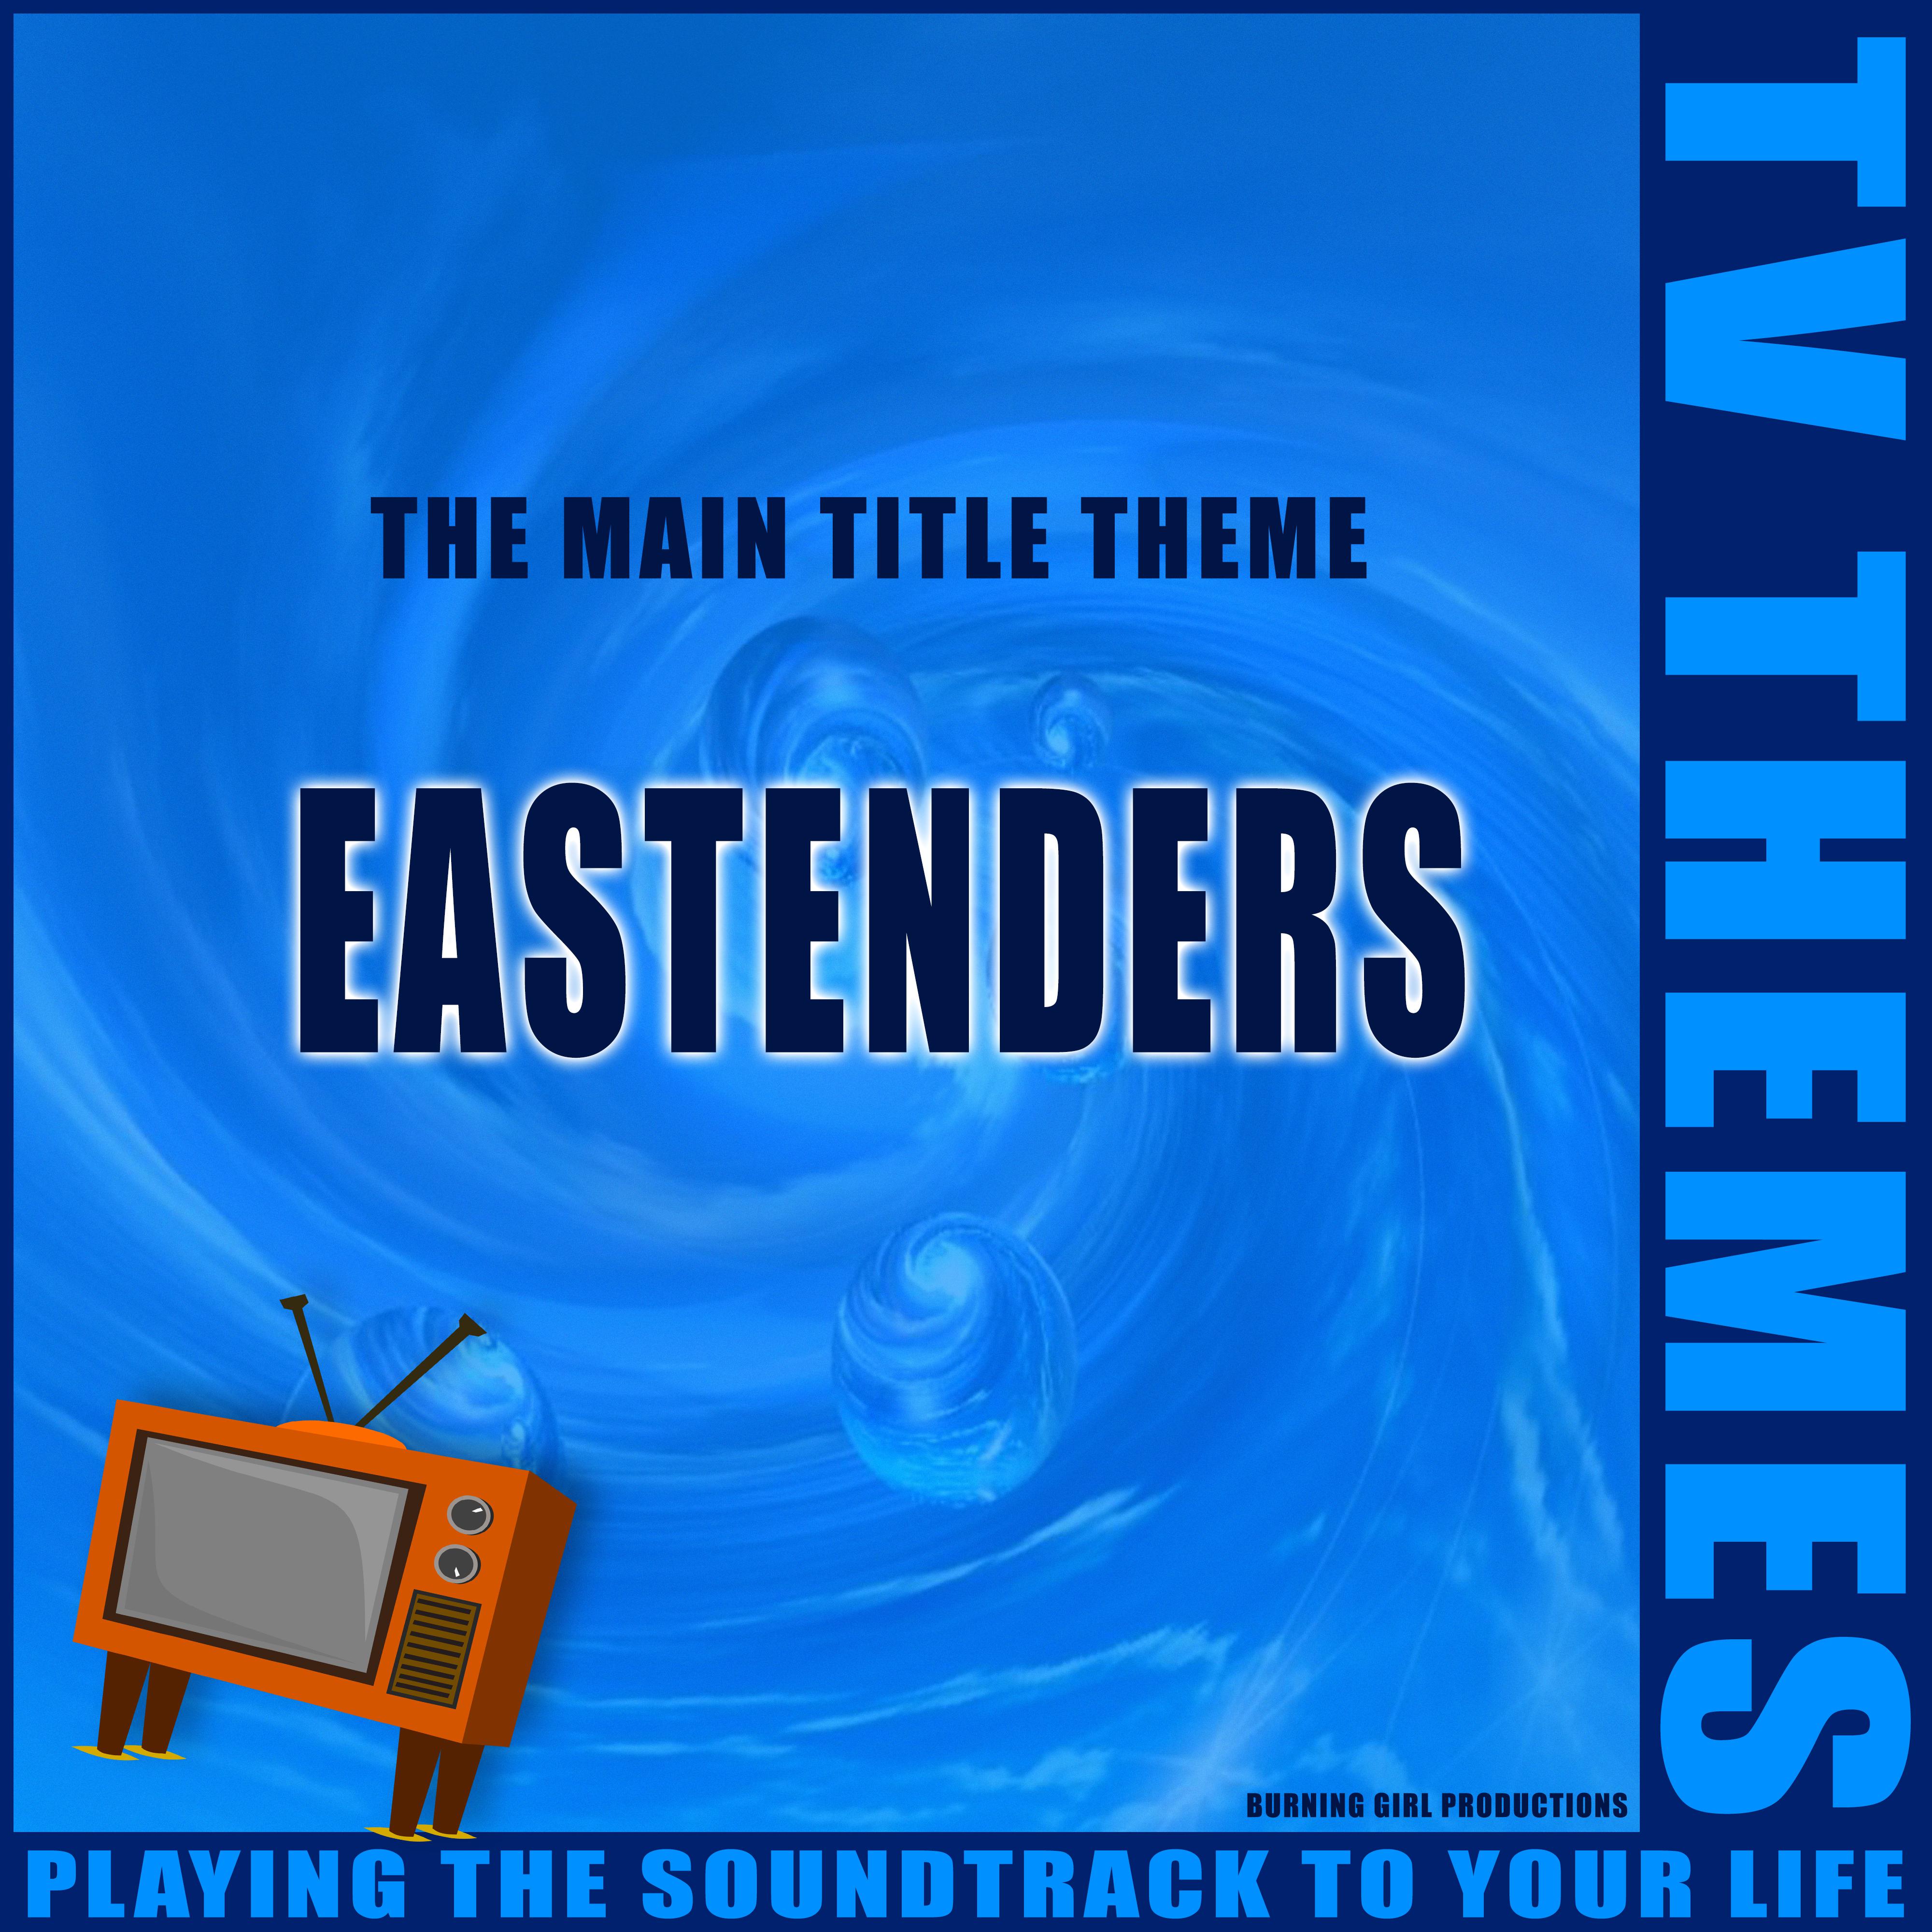 The Main Title Theme - Eastenders